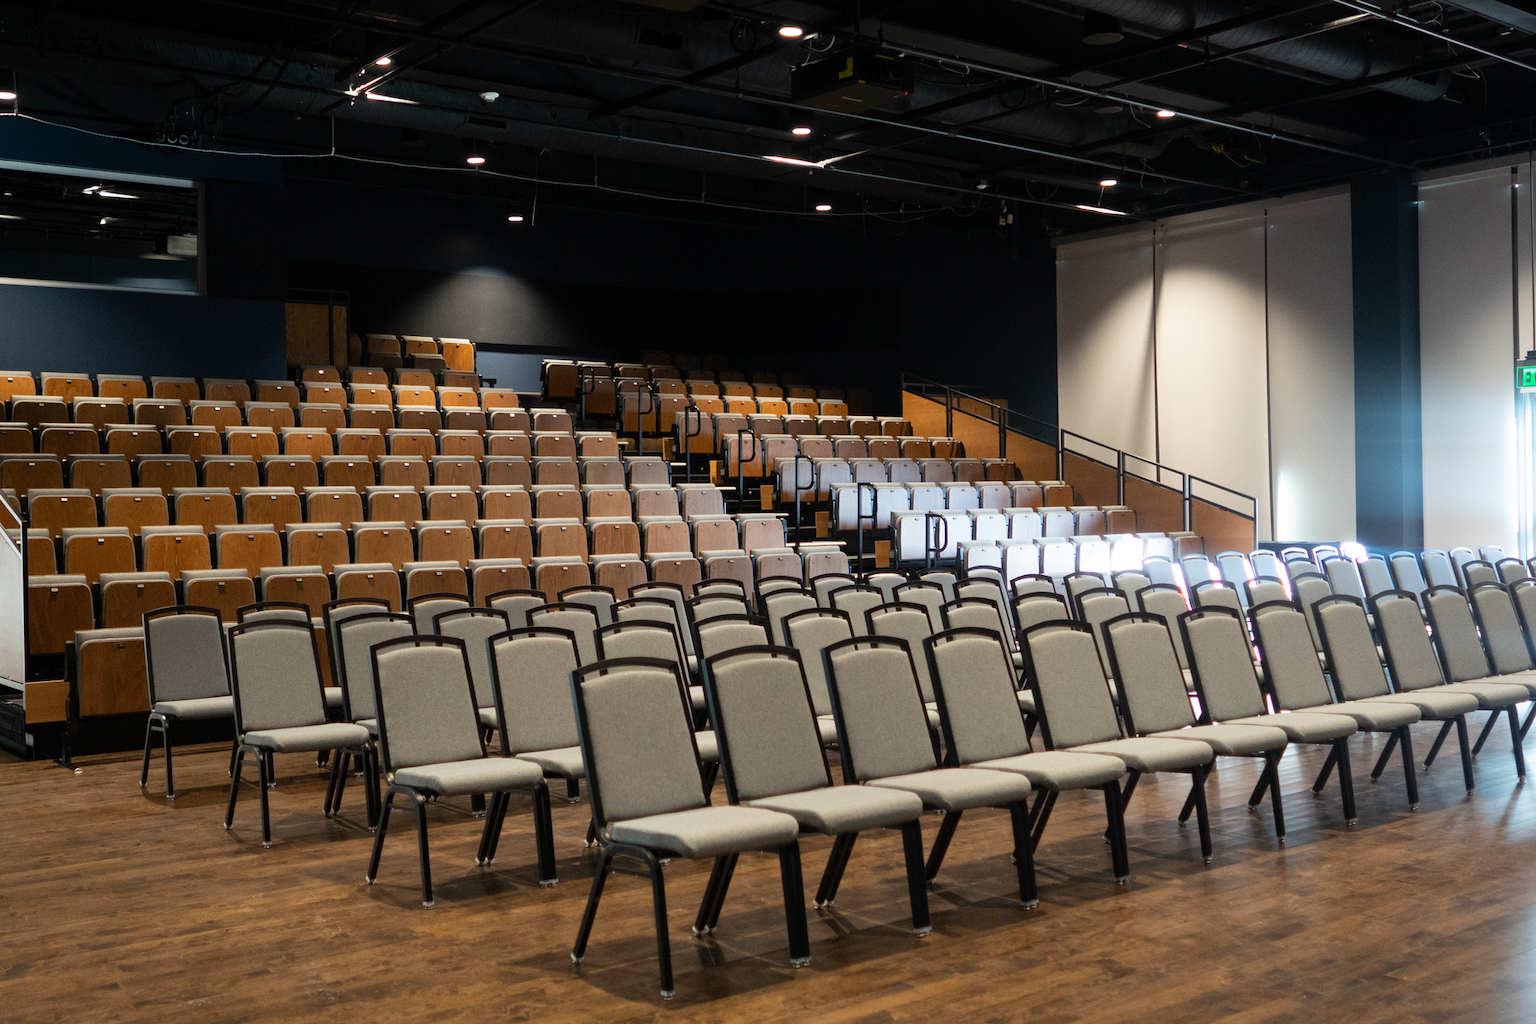 Theater space with bleacher seating and chairs up front.